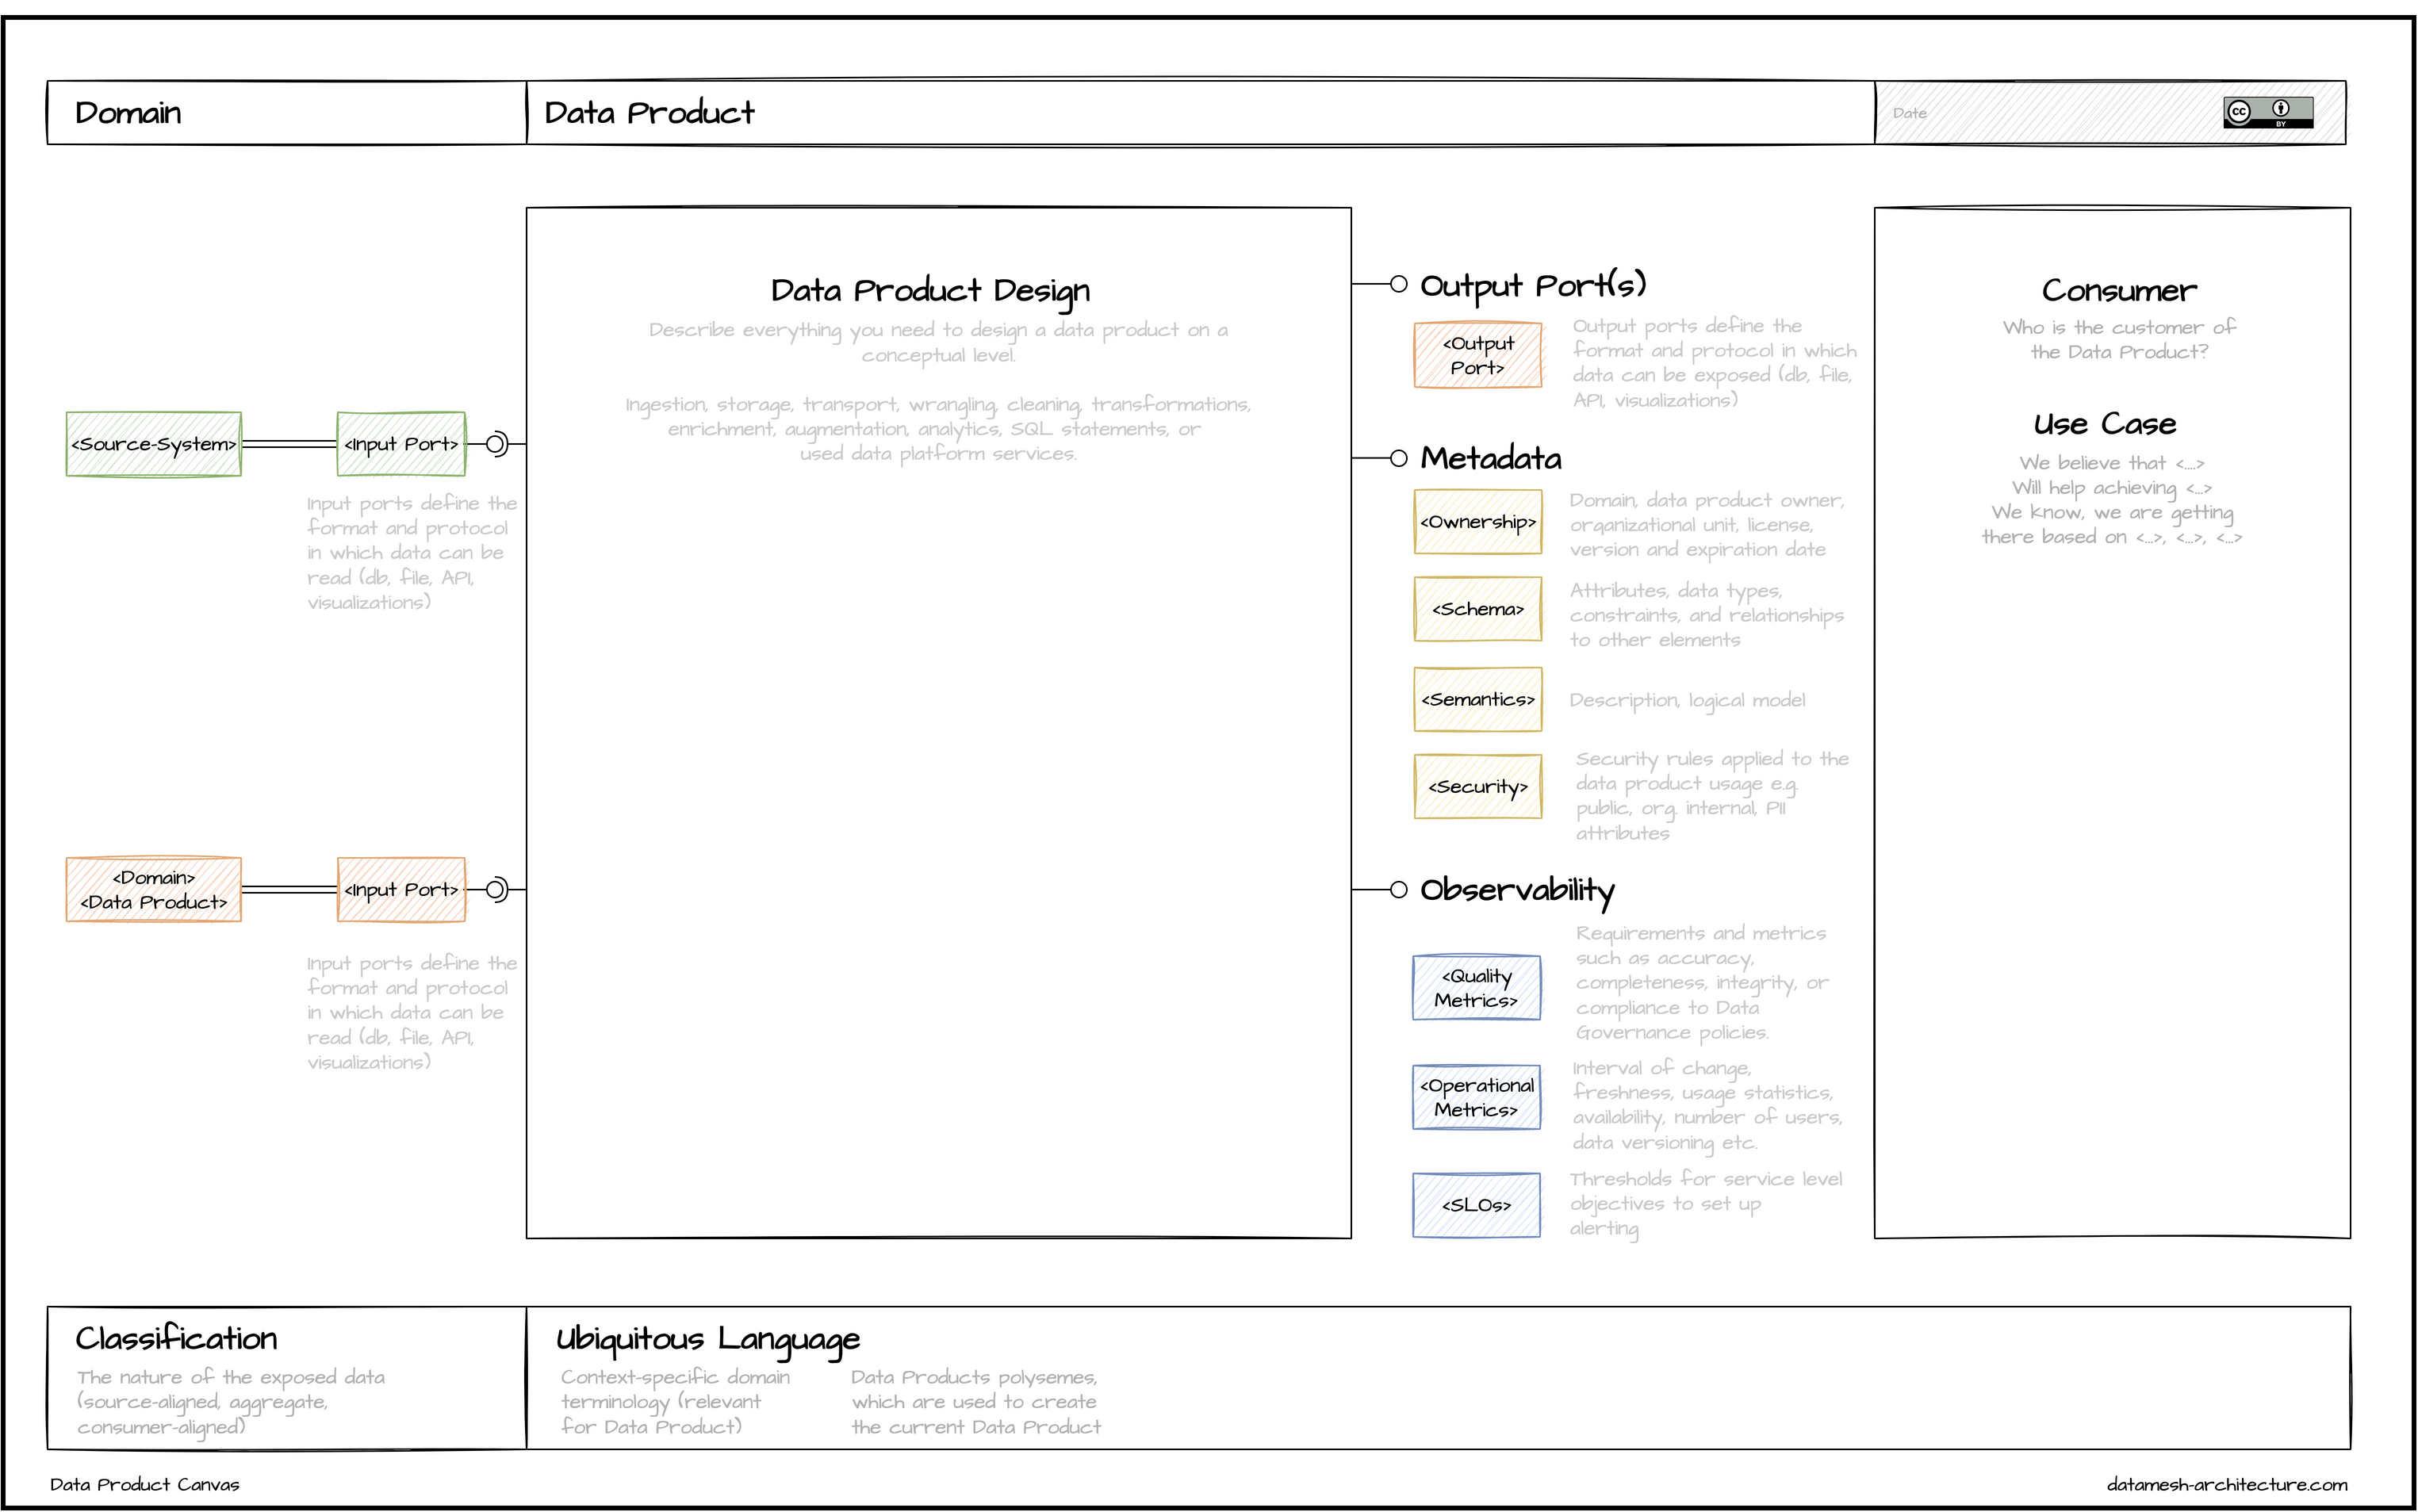 Data Product Canvas